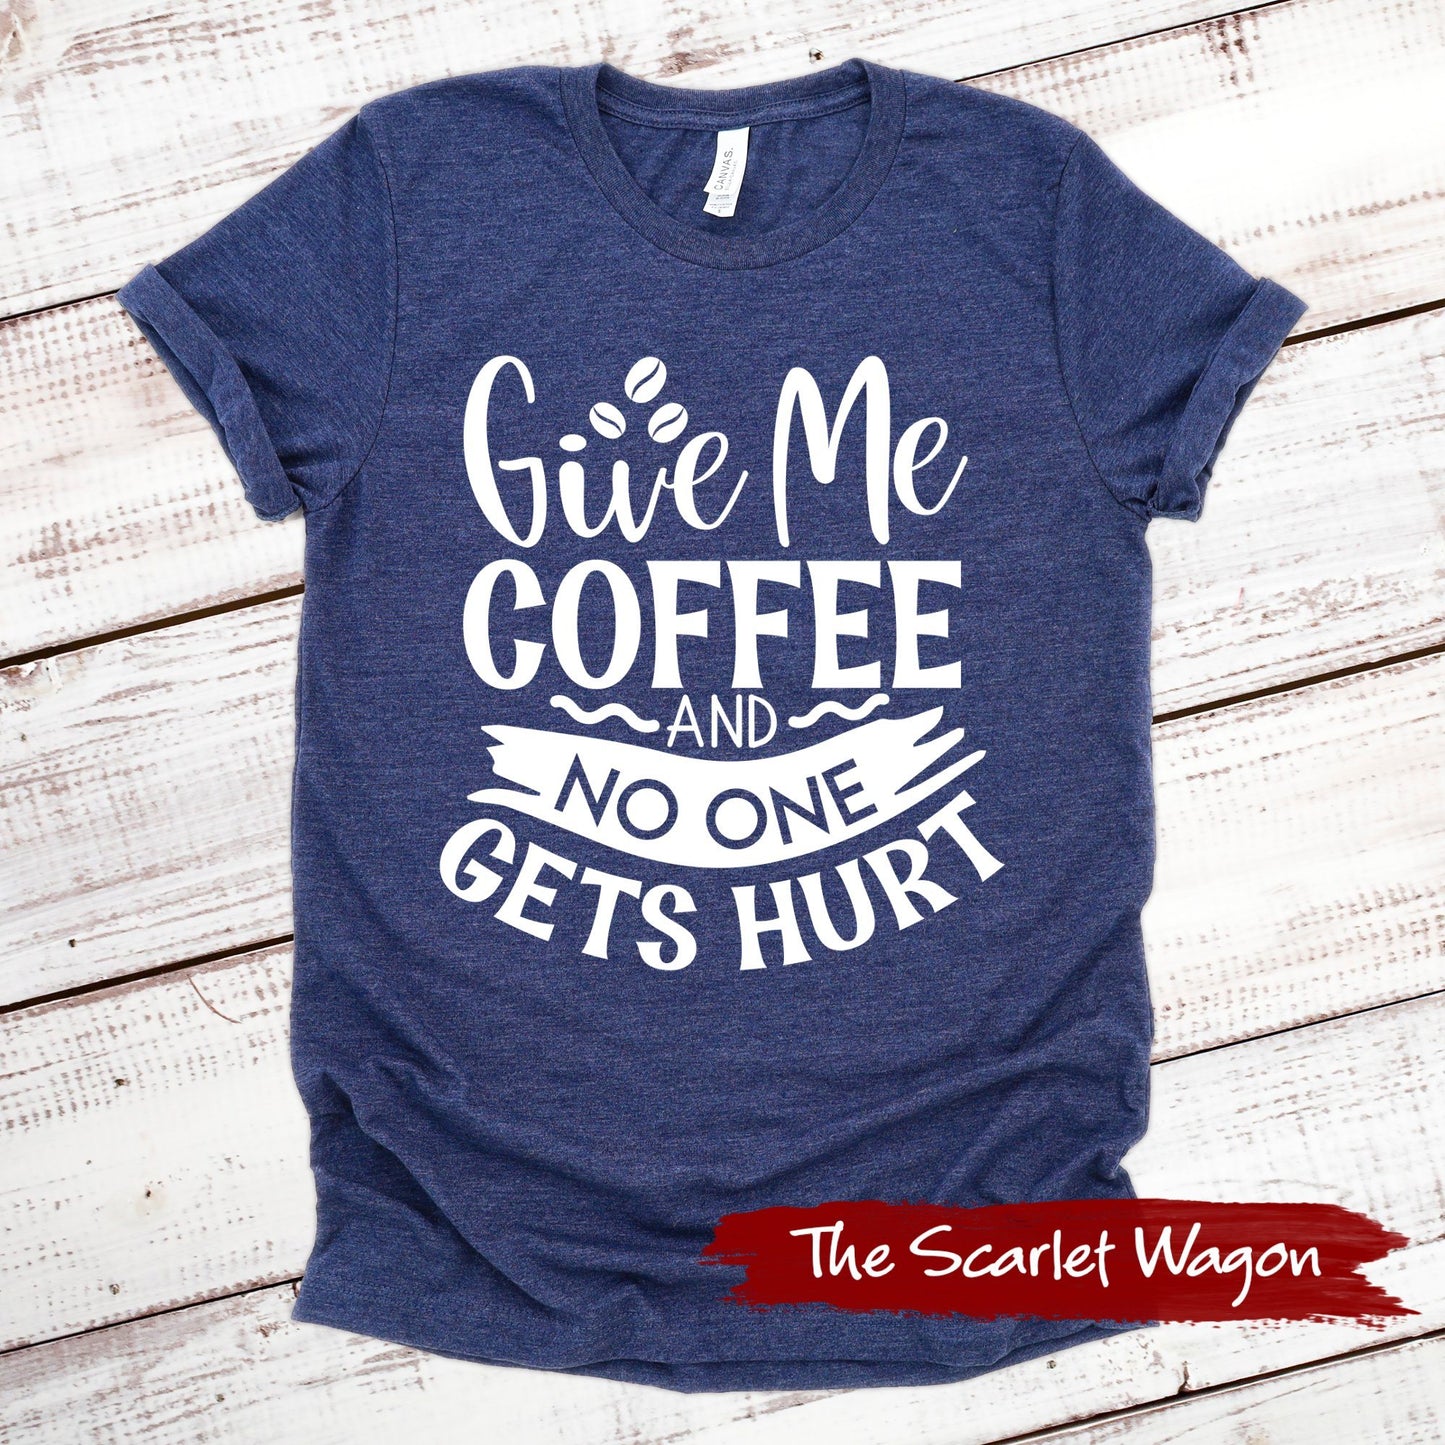 Give Me Coffee and No One Gets Hurt Funny Shirt Scarlet Wagon Heather Navy XS 